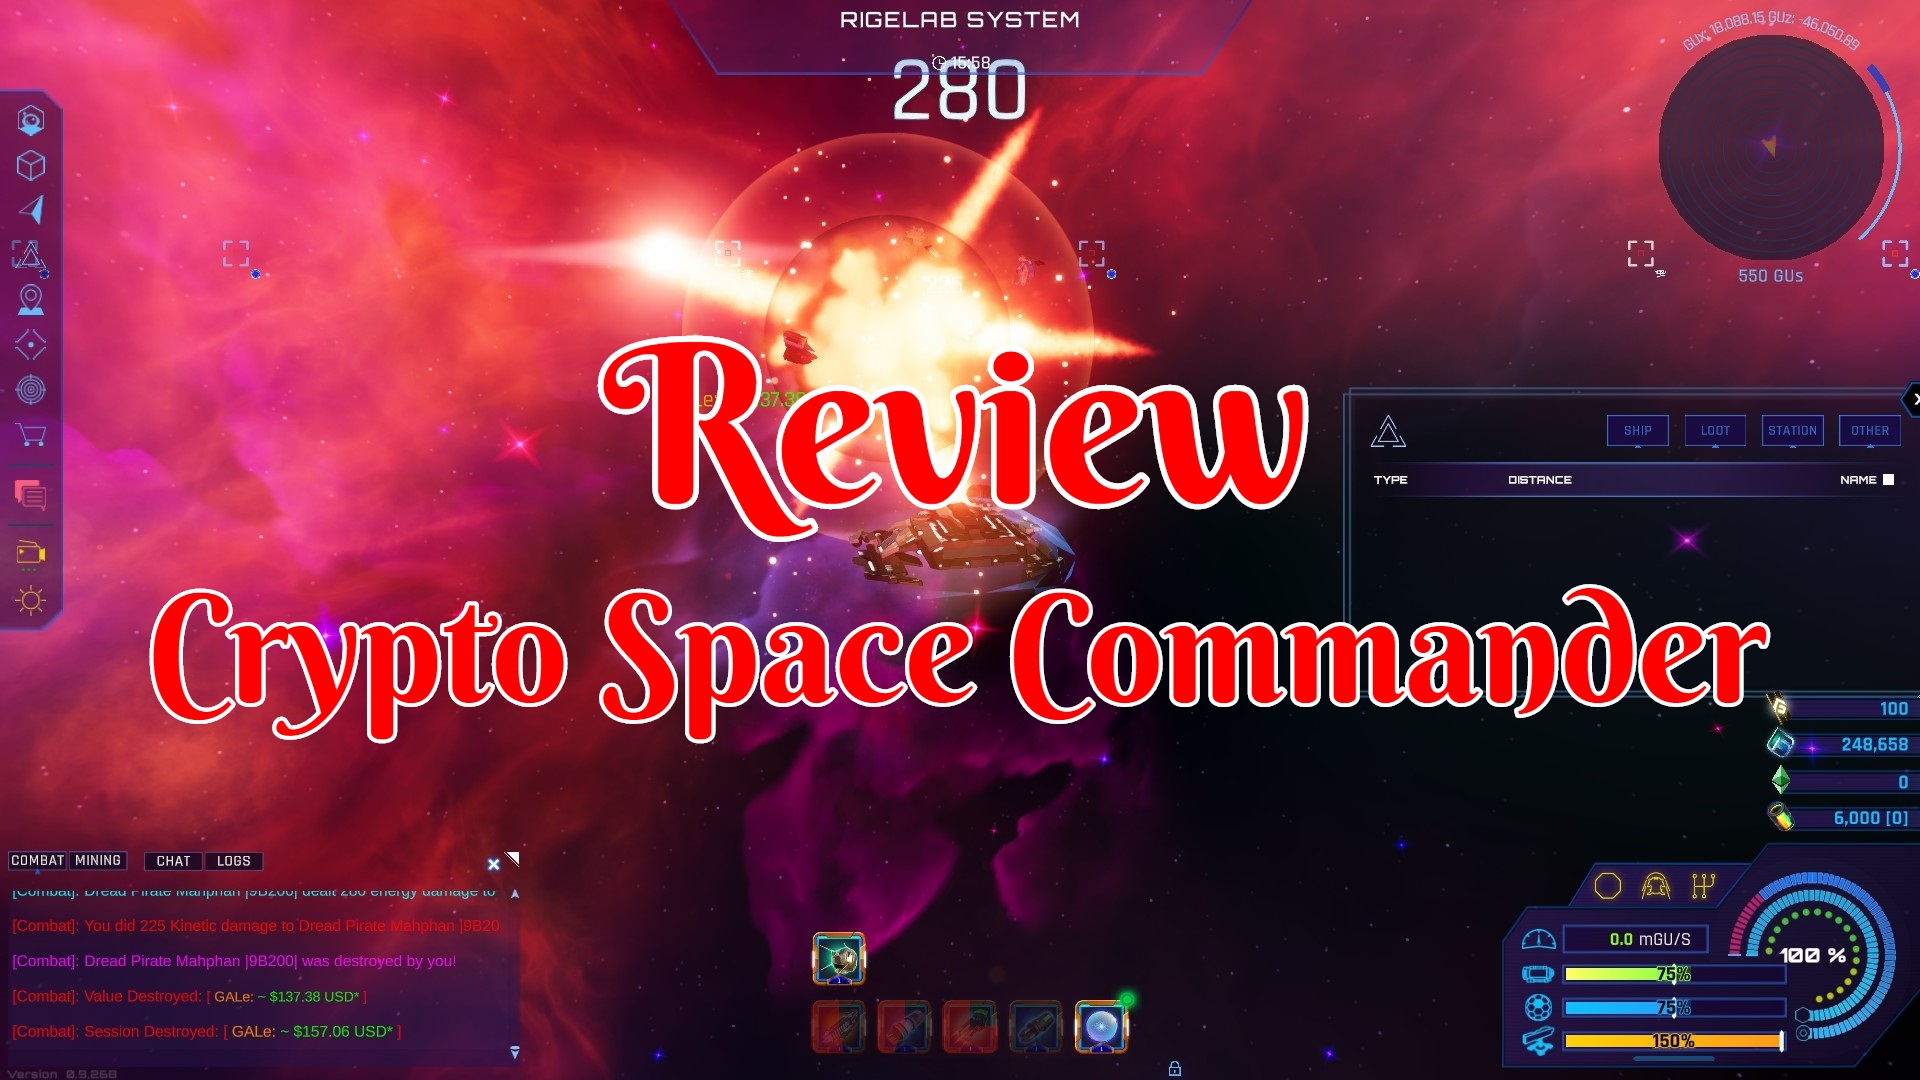 Crypto Space Commander csc space mmo eth game.jpg